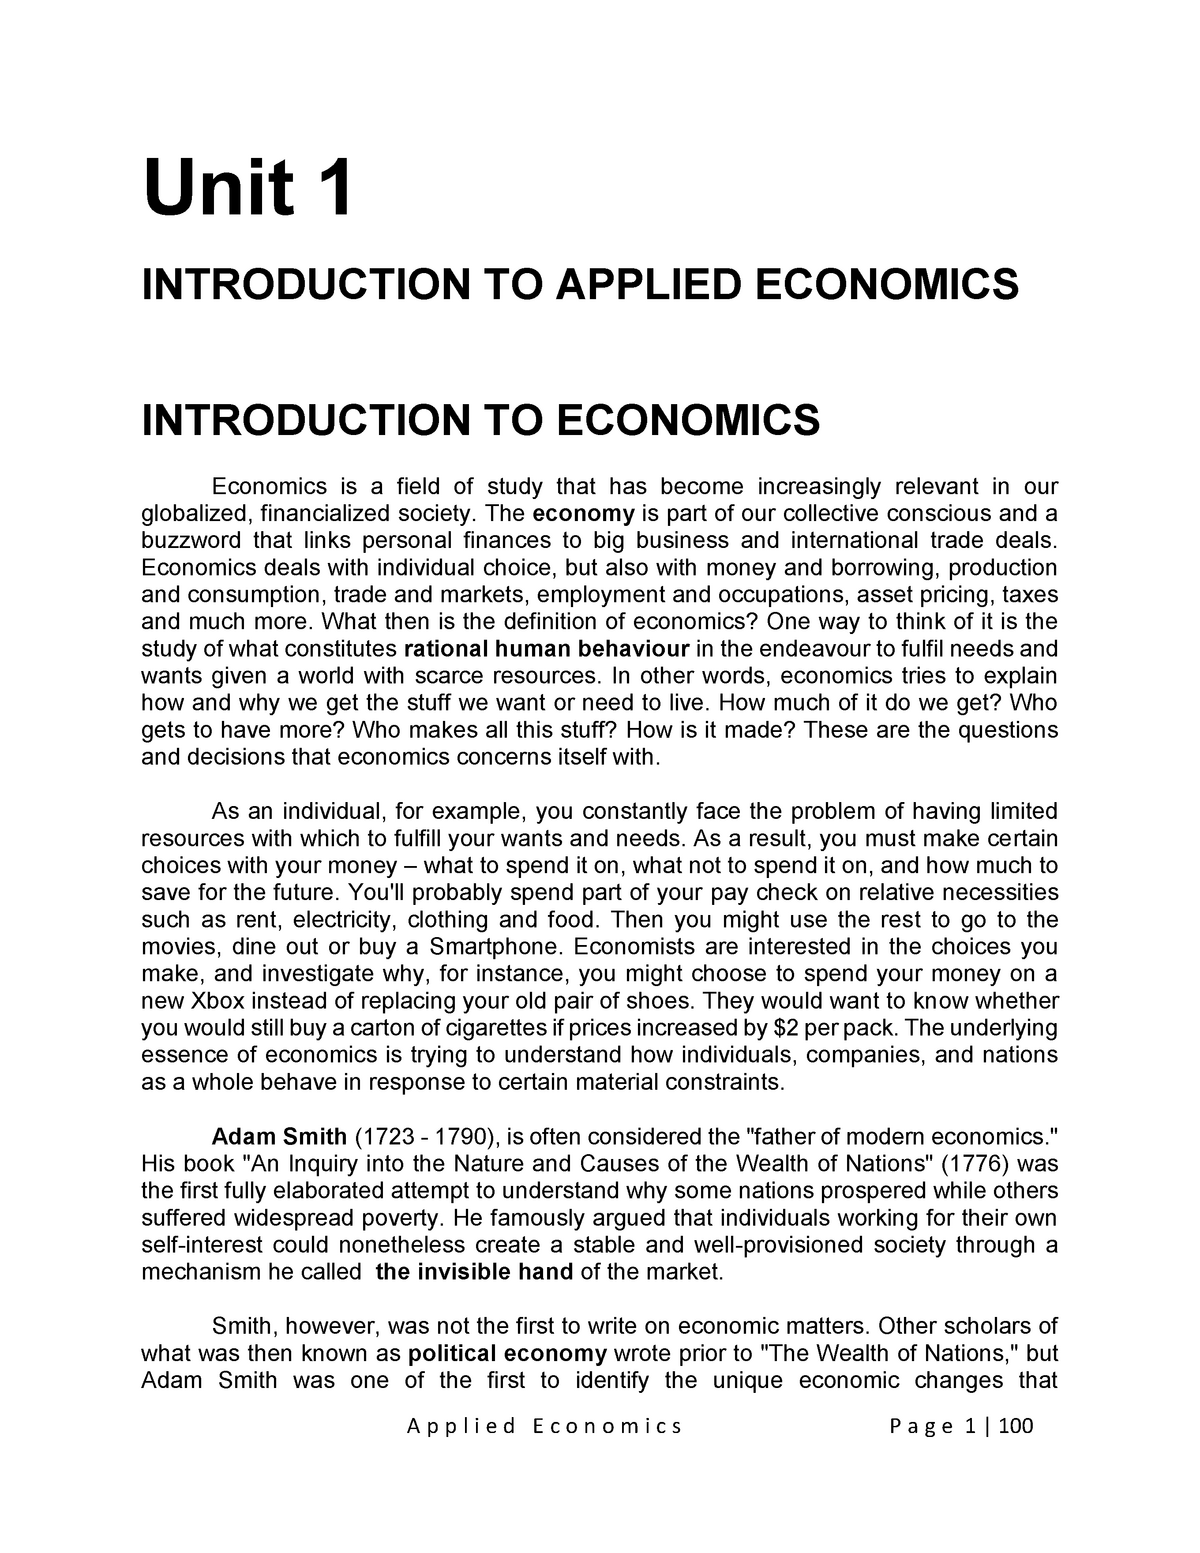 economic systems essay introduction